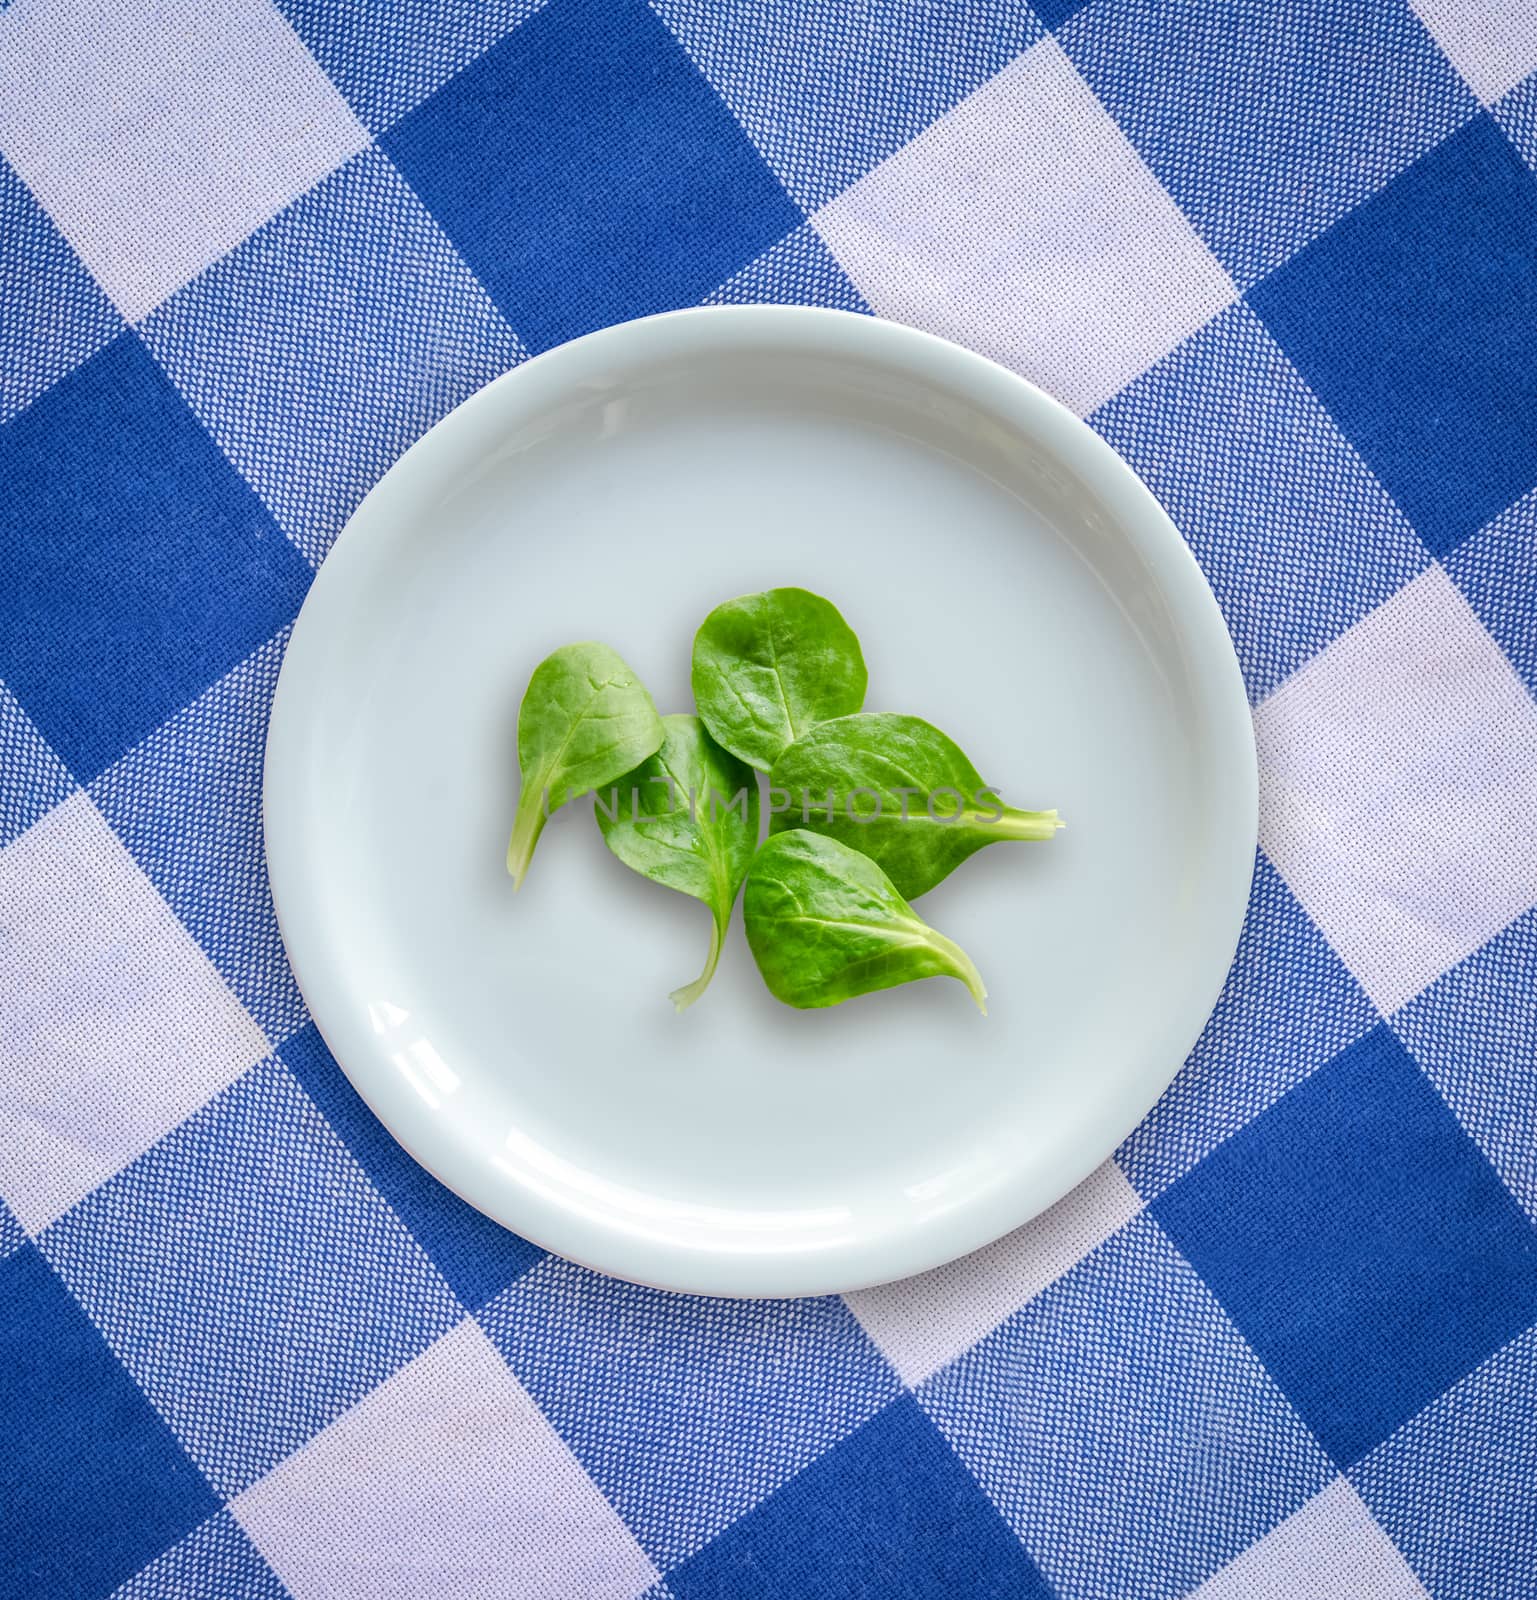 Diet Concept Of Salad Leaves On Empty Plate by mrdoomits